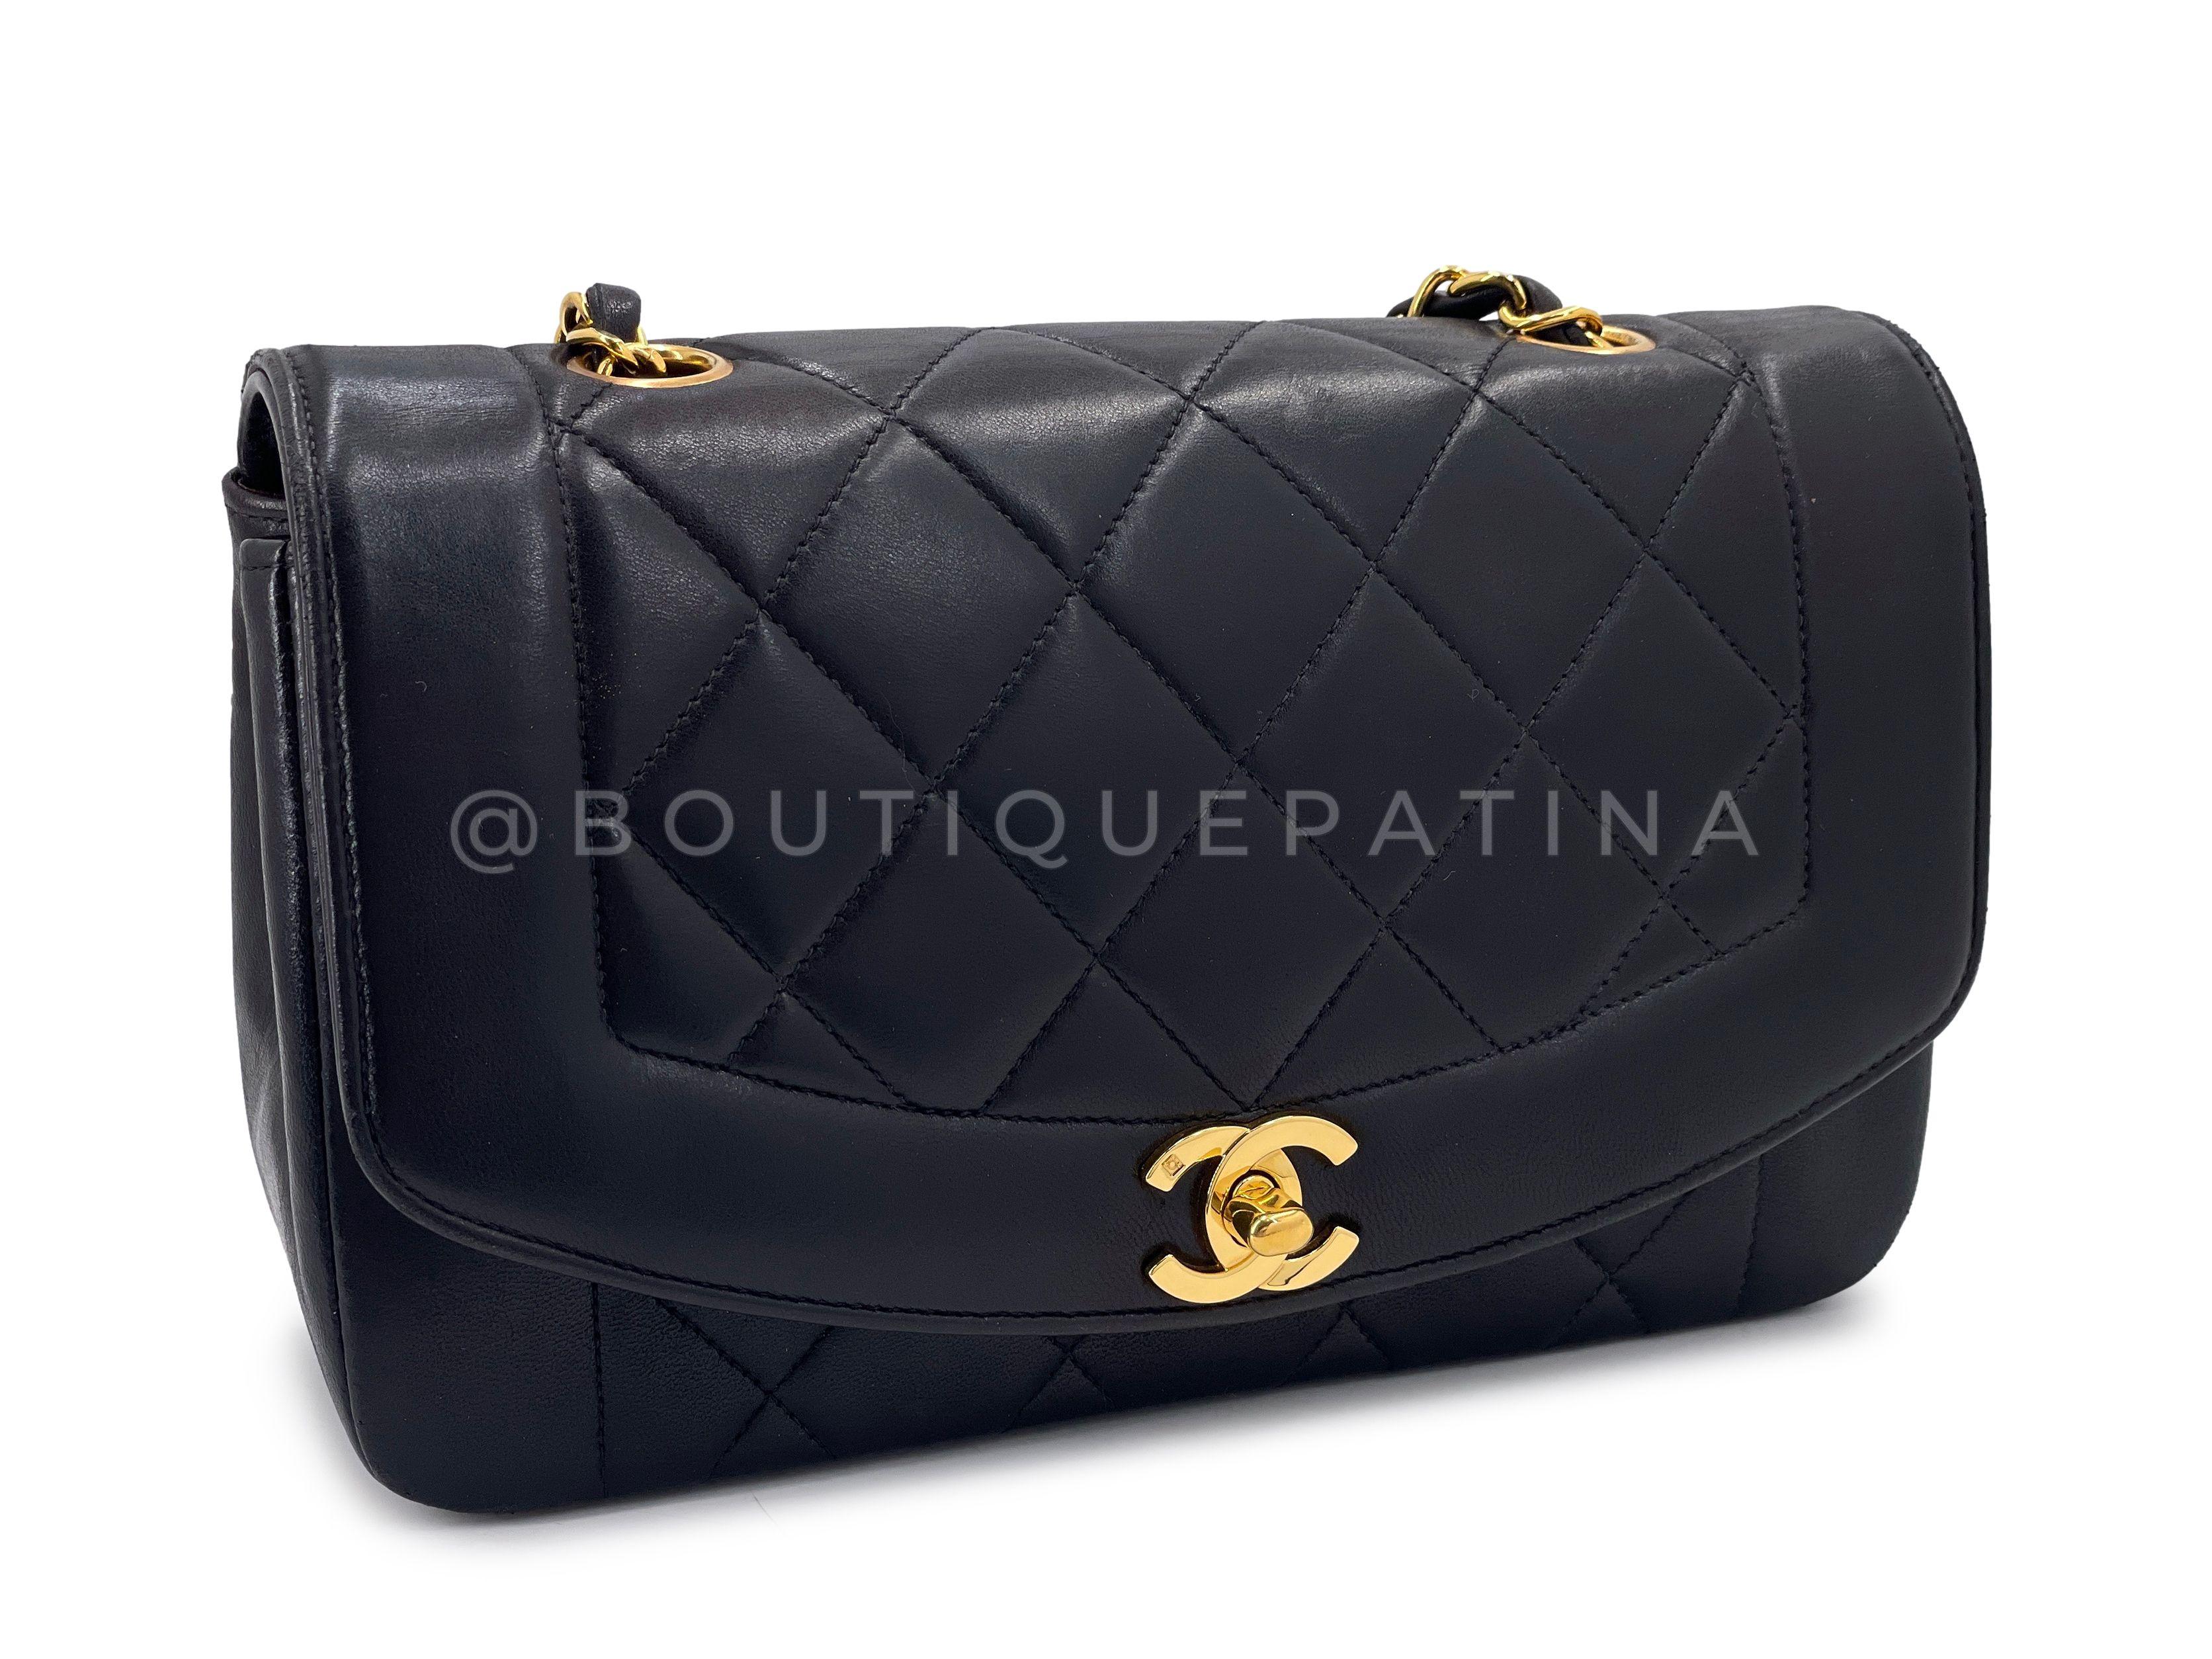 Chanel 1995 Vintage Black Small Diana Bag Lambskin 24k GHW 65663 In Excellent Condition For Sale In Costa Mesa, CA